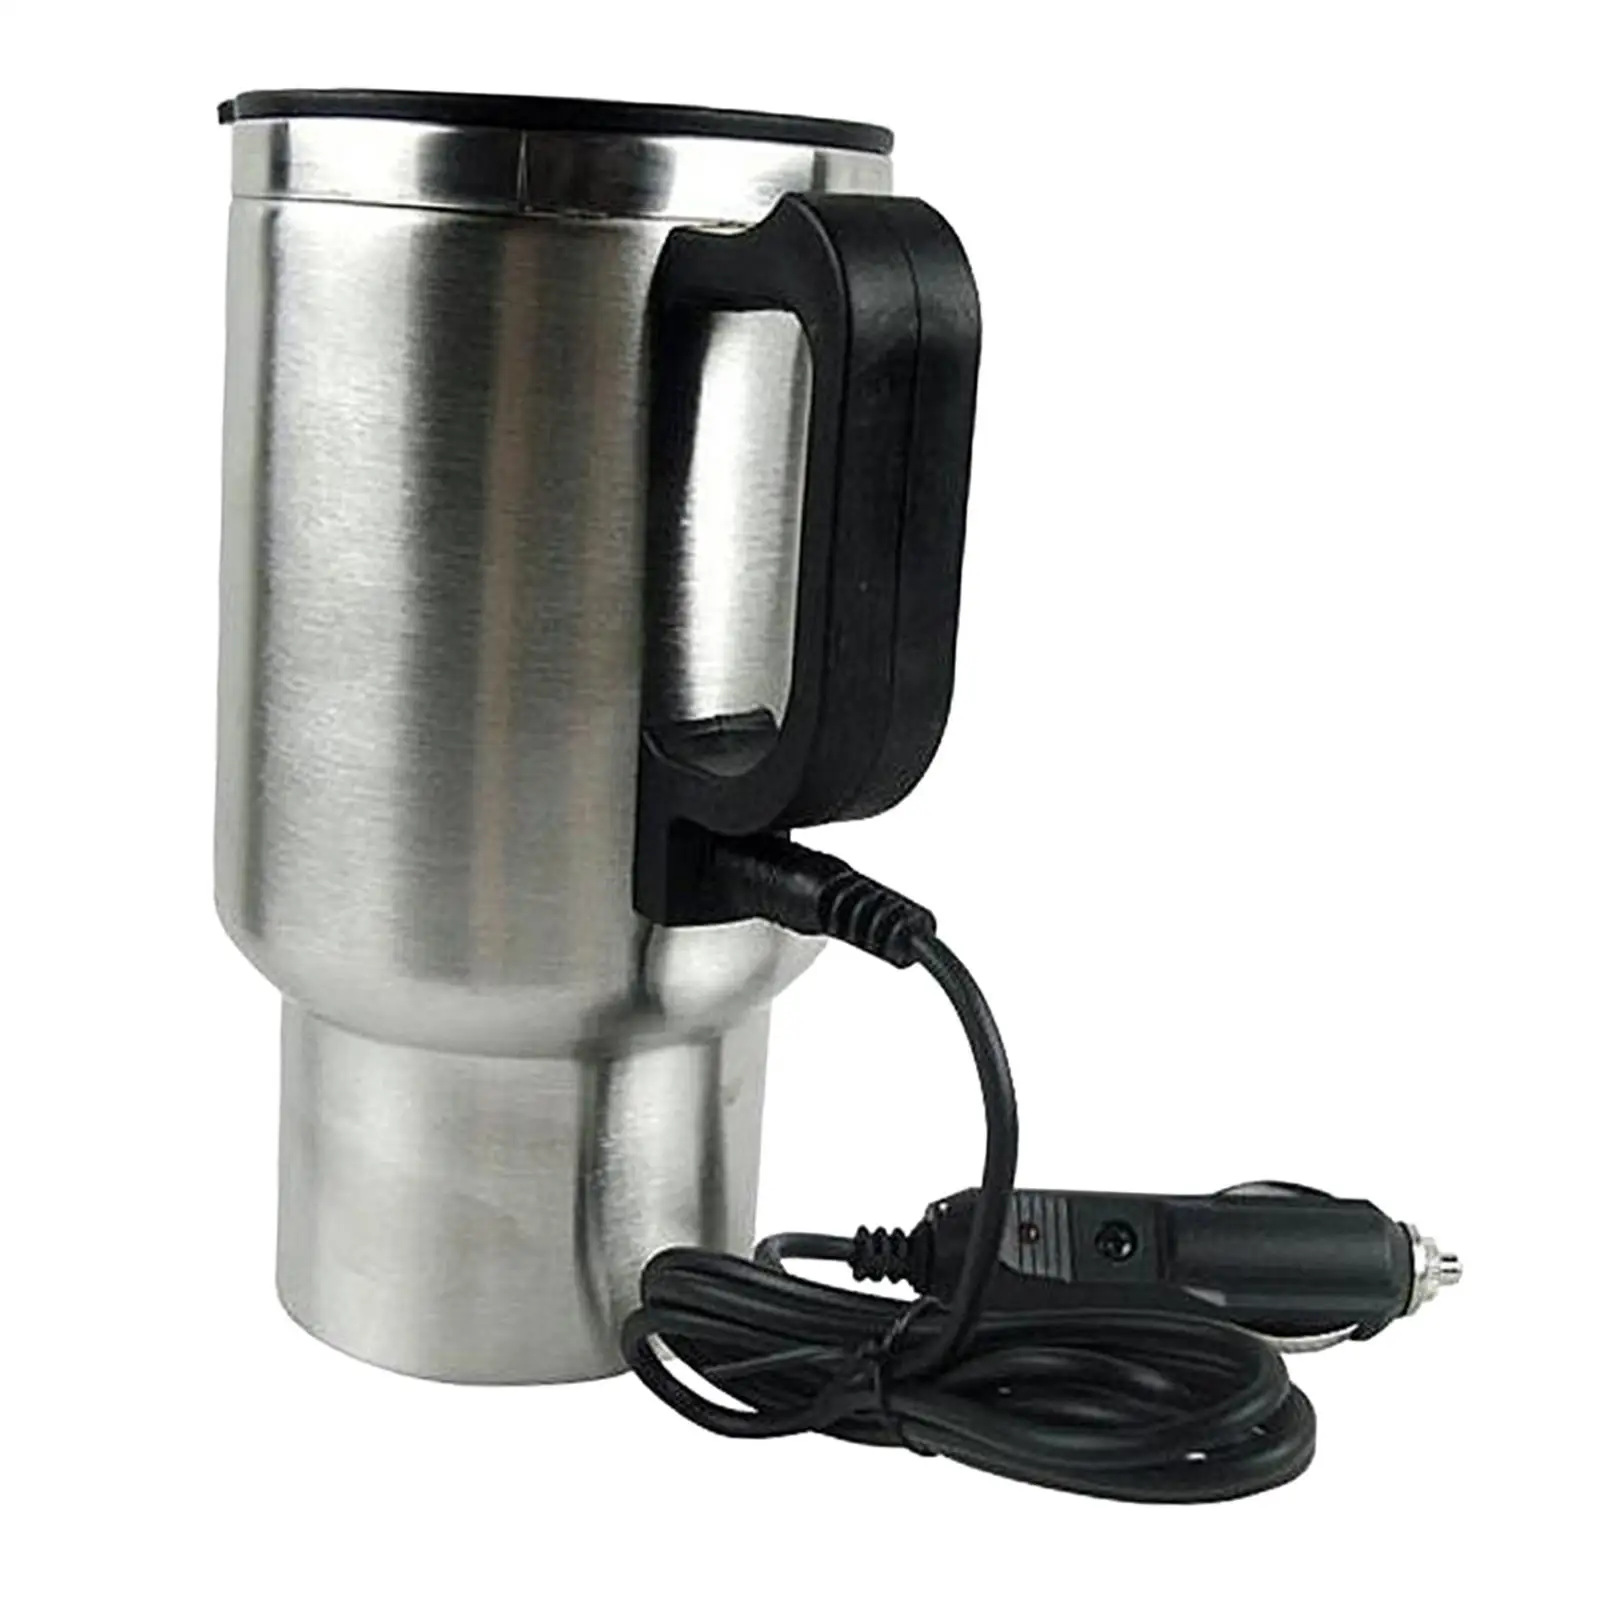 12V 480ml Car Electric Kettle Heated Travel Mug Water Bottle Portable Stainless Steel for Drivers, Business Man Durable